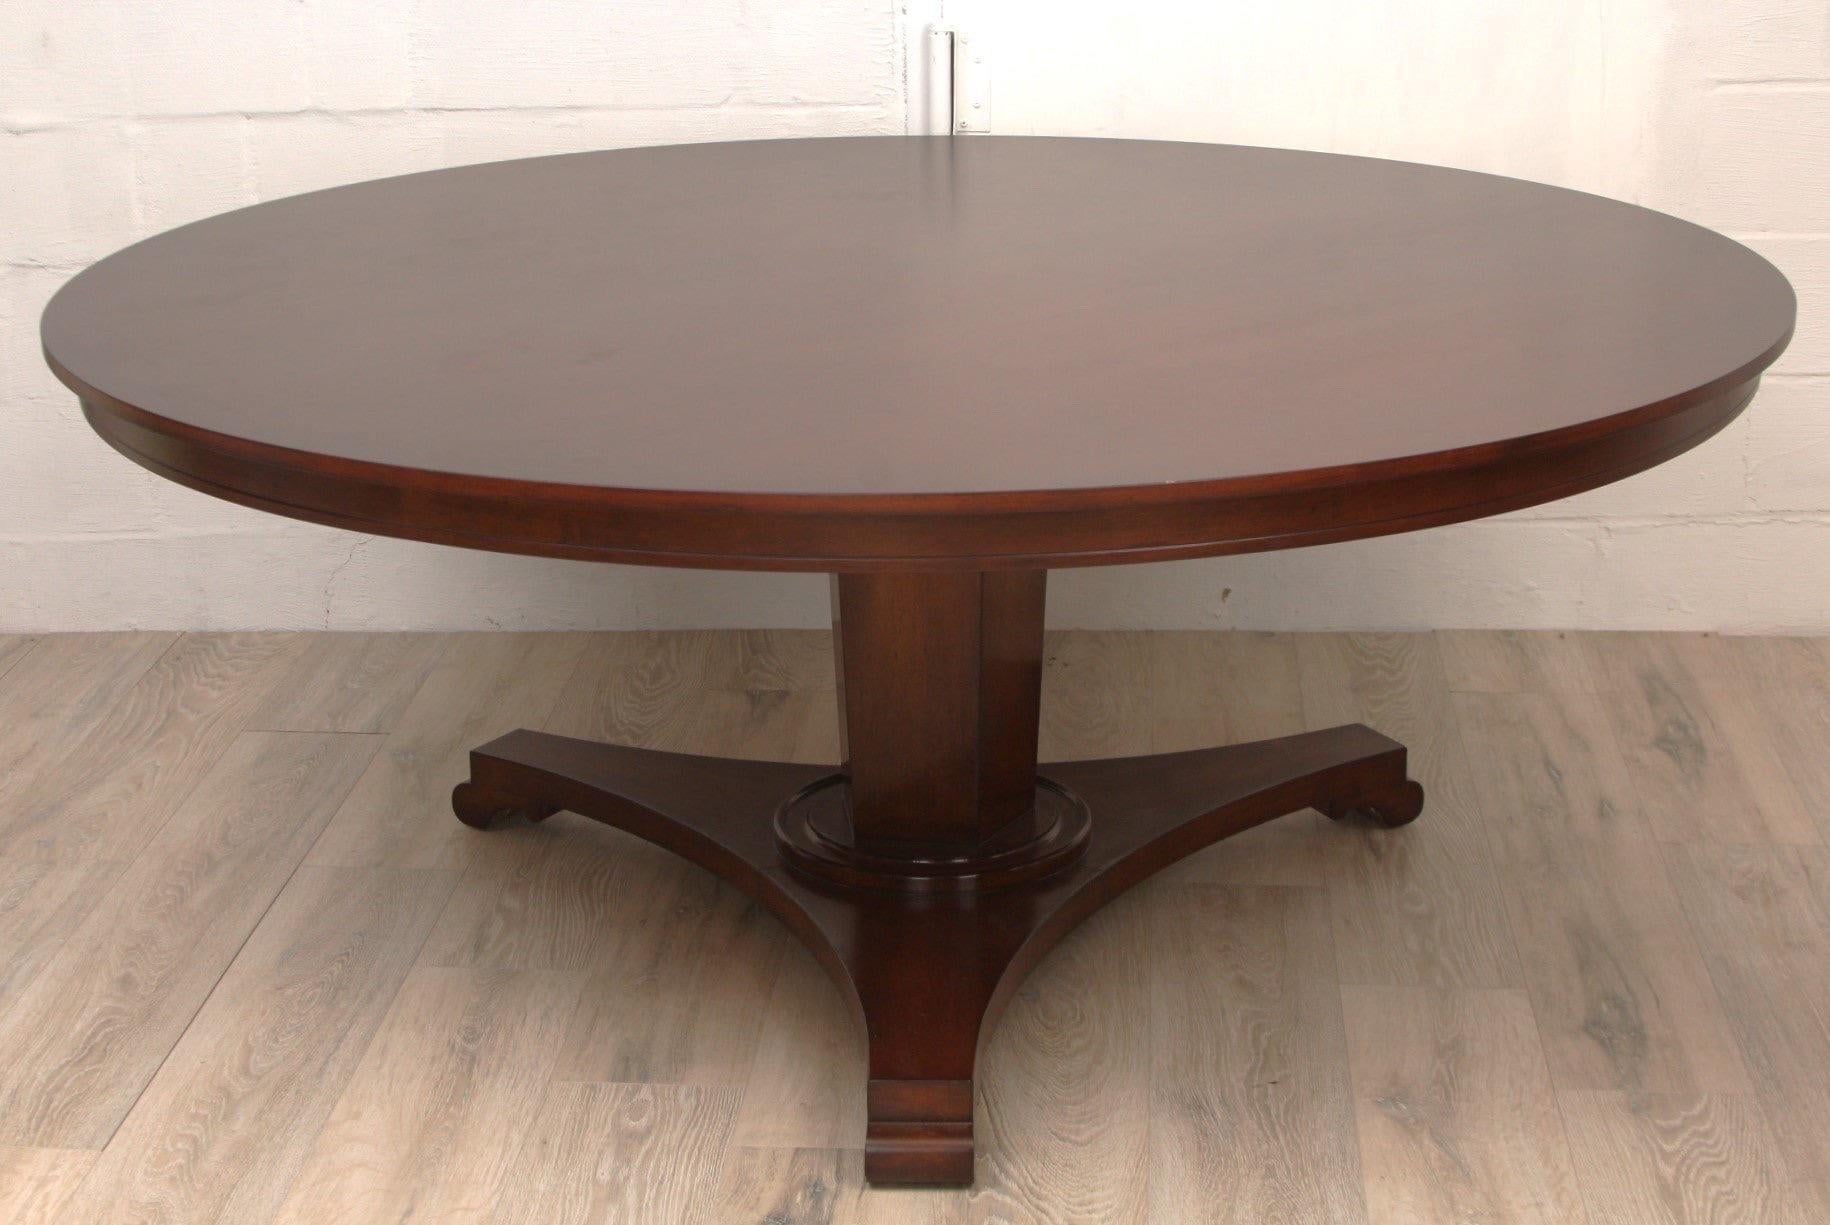 Nancy Corzine Colbert Dining Table in richly polished wood with a column base.

Marked with stamped factory numbers.

Newly refinished and in excellent condition.

Dimensions:  72” W x 29.5” H  x  26.5” Width of Base at Floor